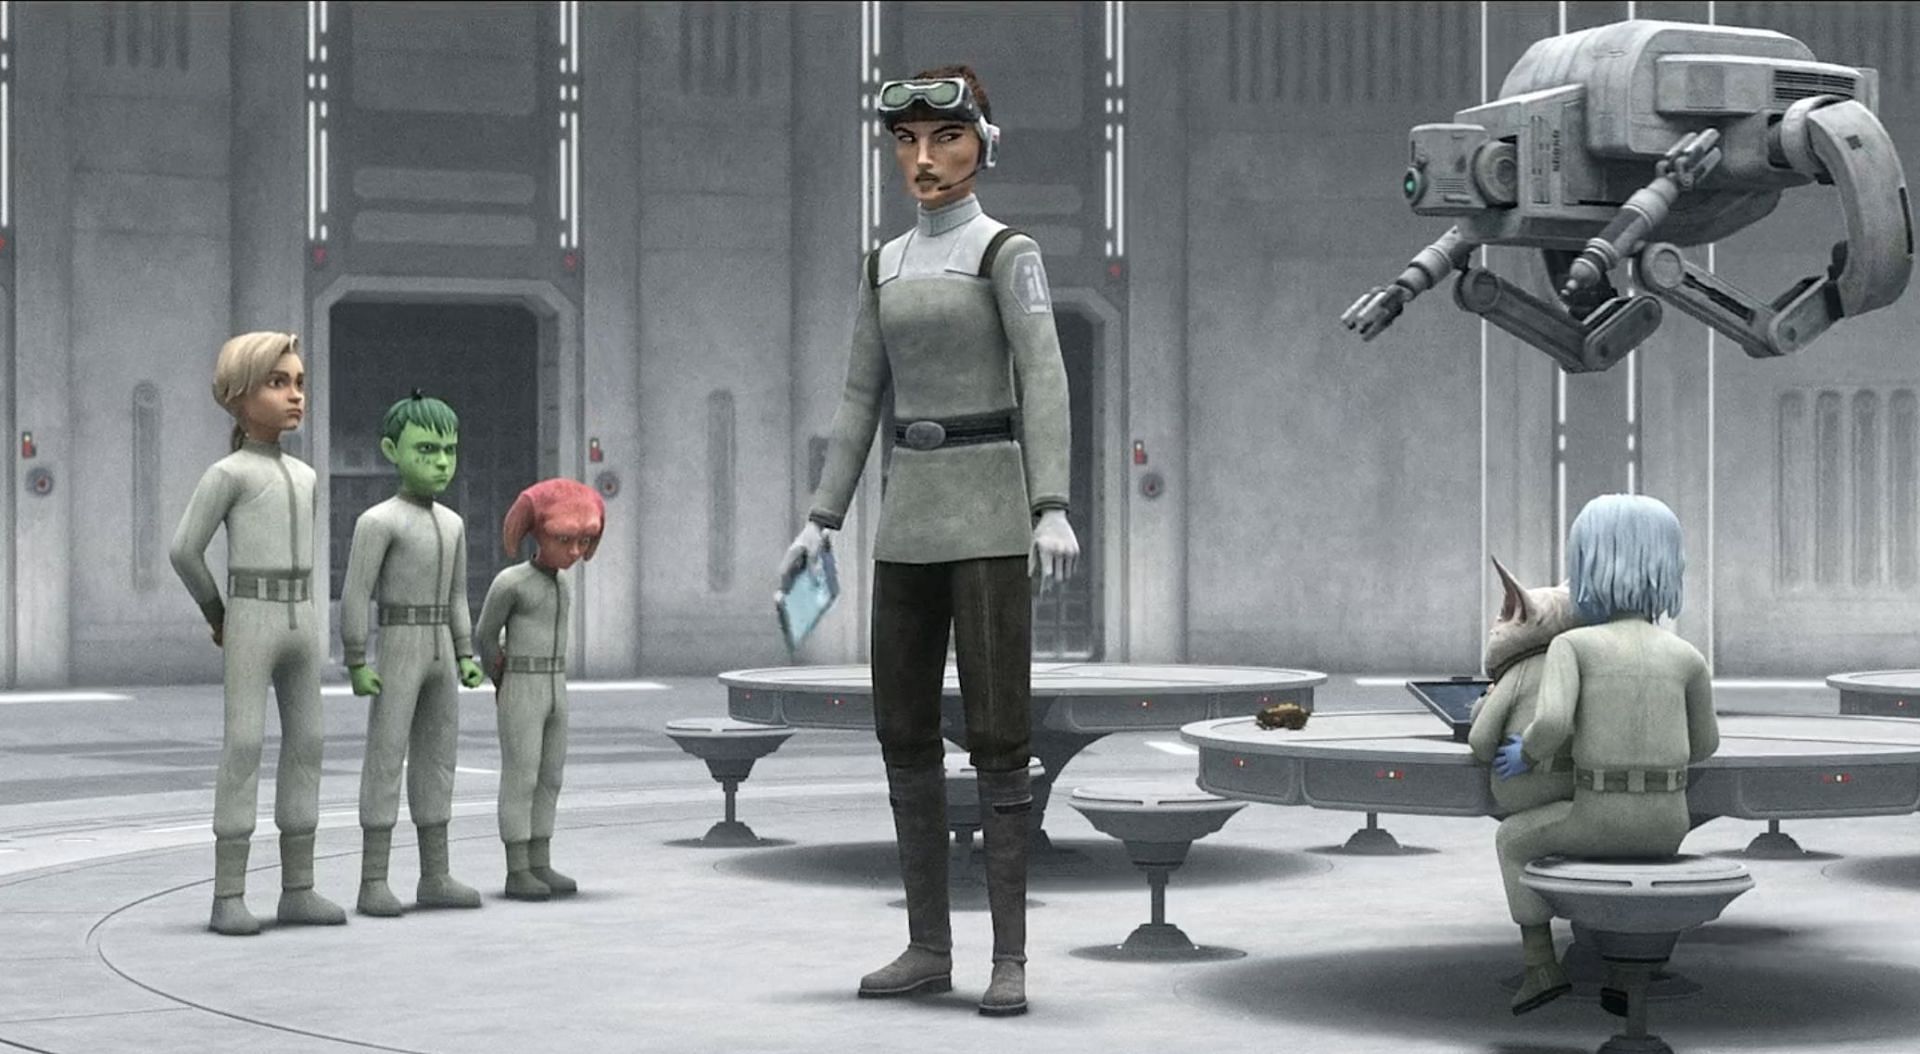 A still from the finale episode of Star Wars: The Bad Batch. (Image via Disney+)